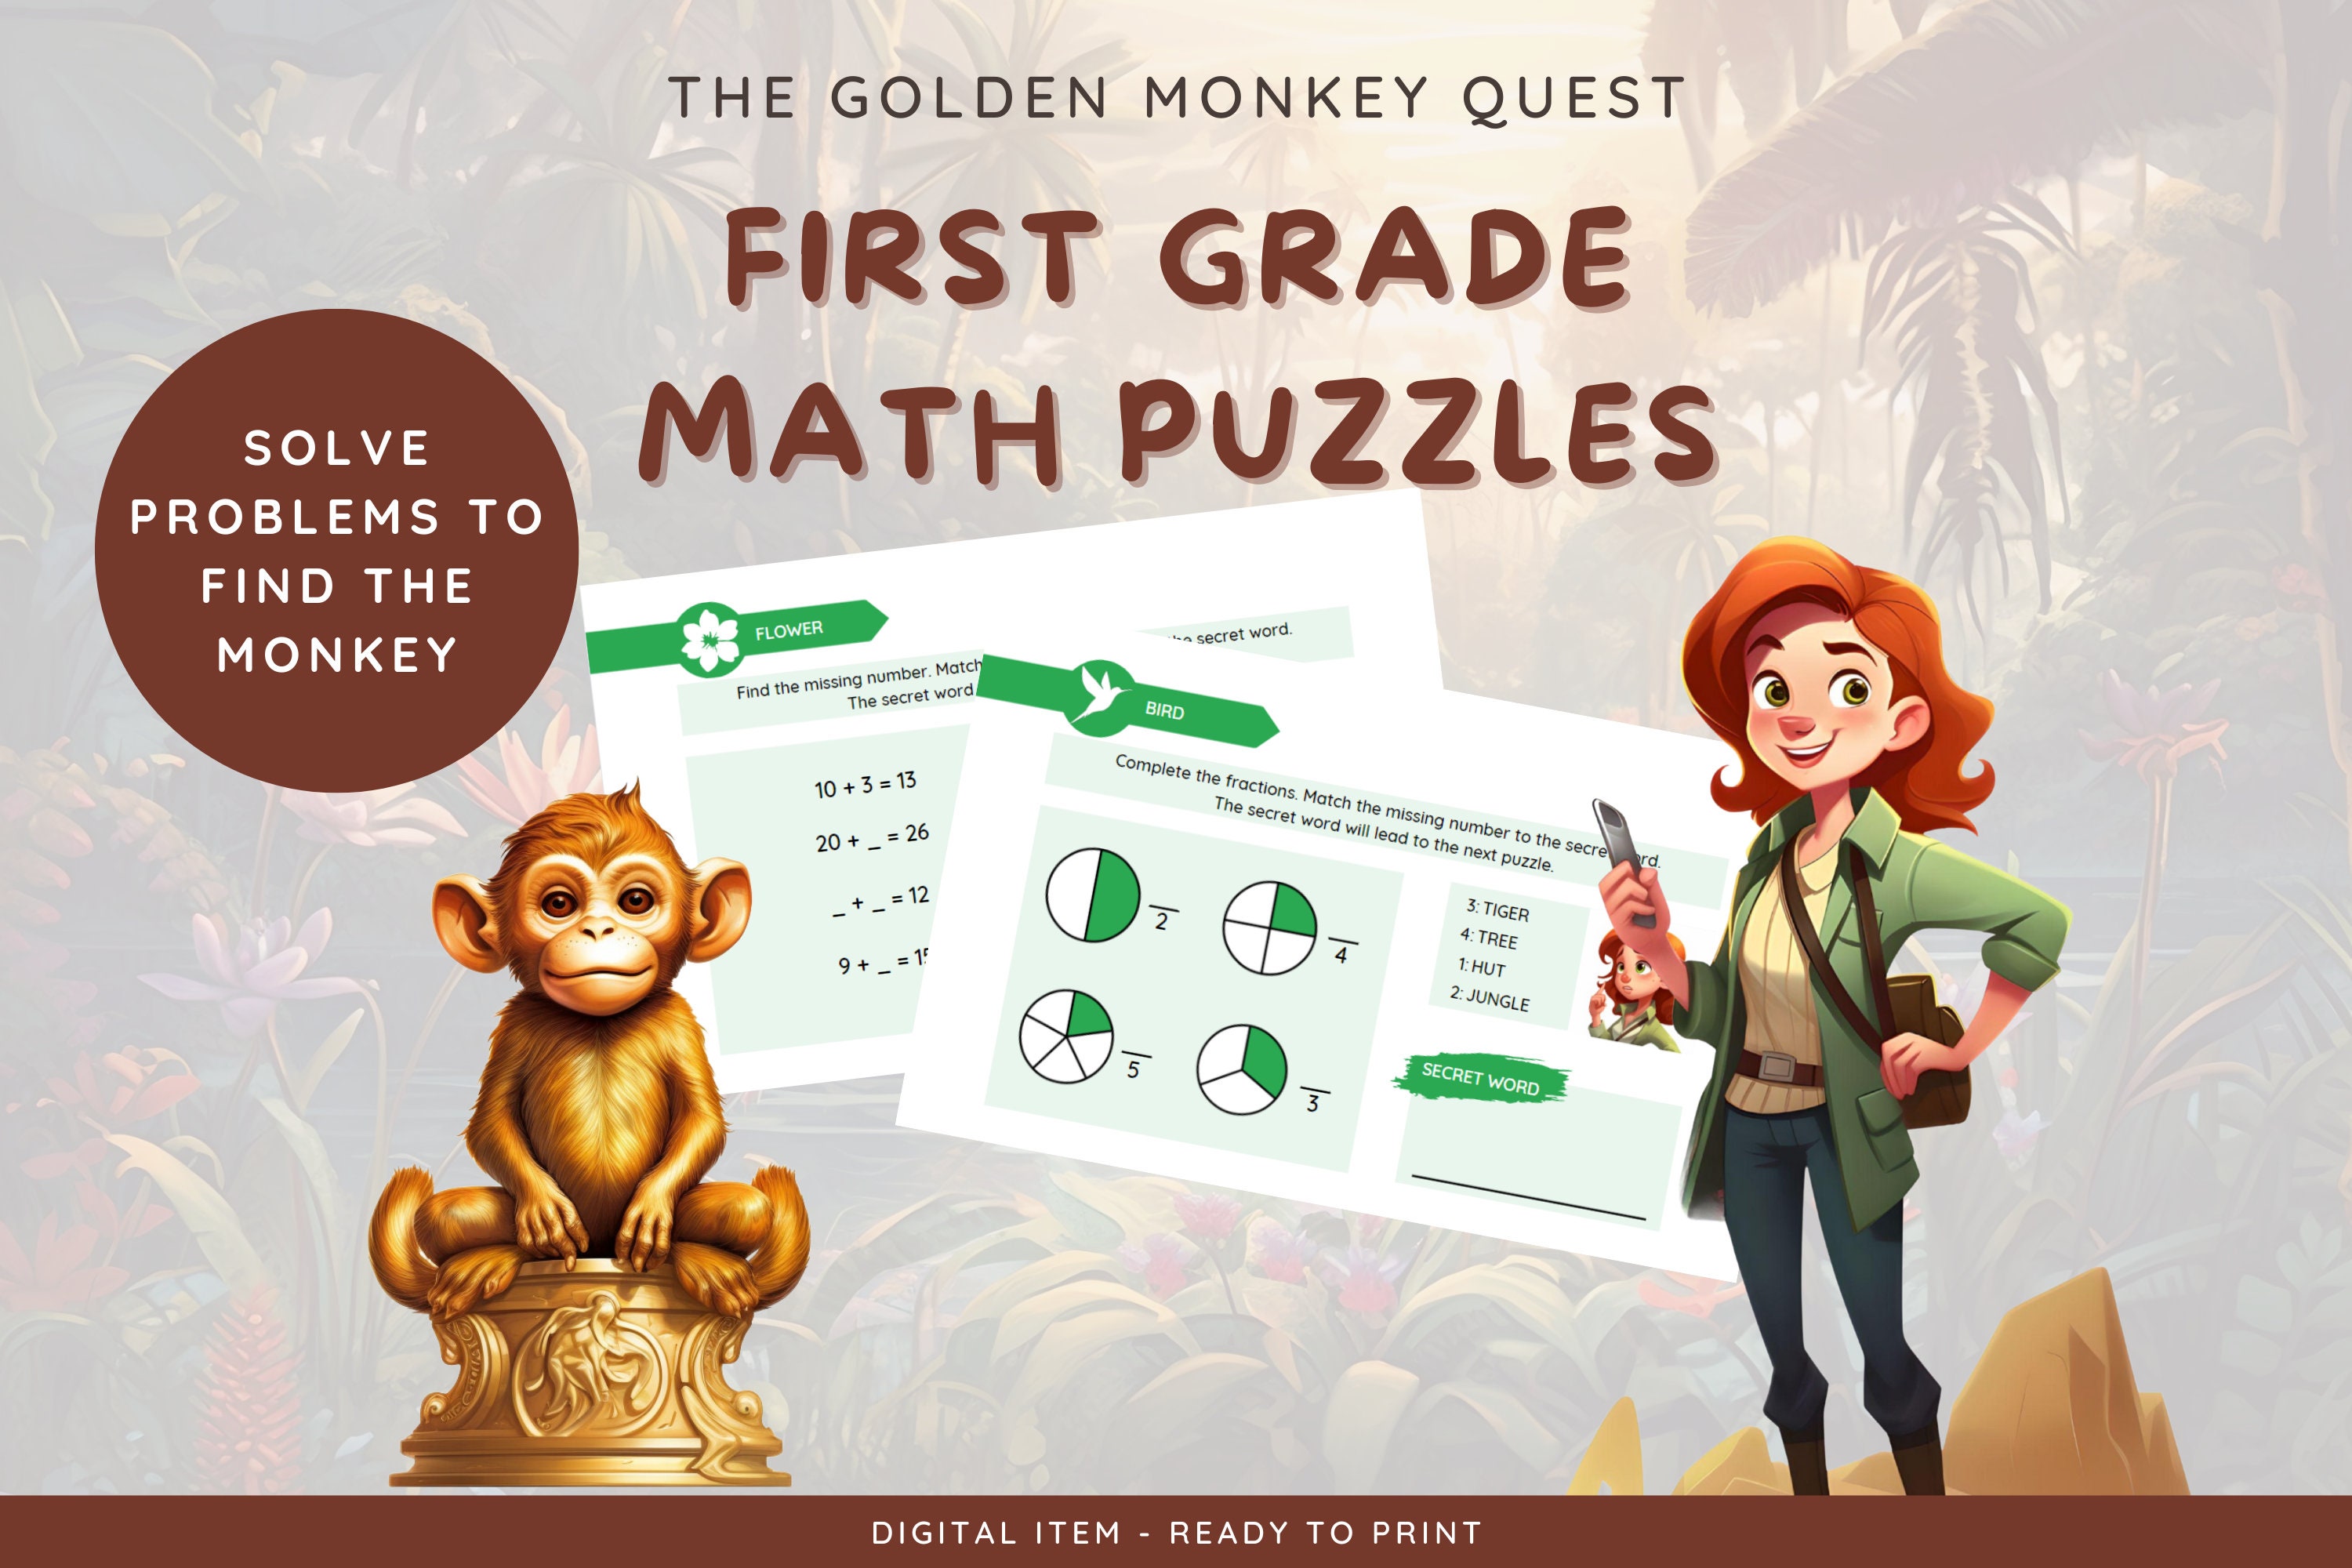 Top 5 questions about Monkey mart Game, by qpule, Nov, 2023